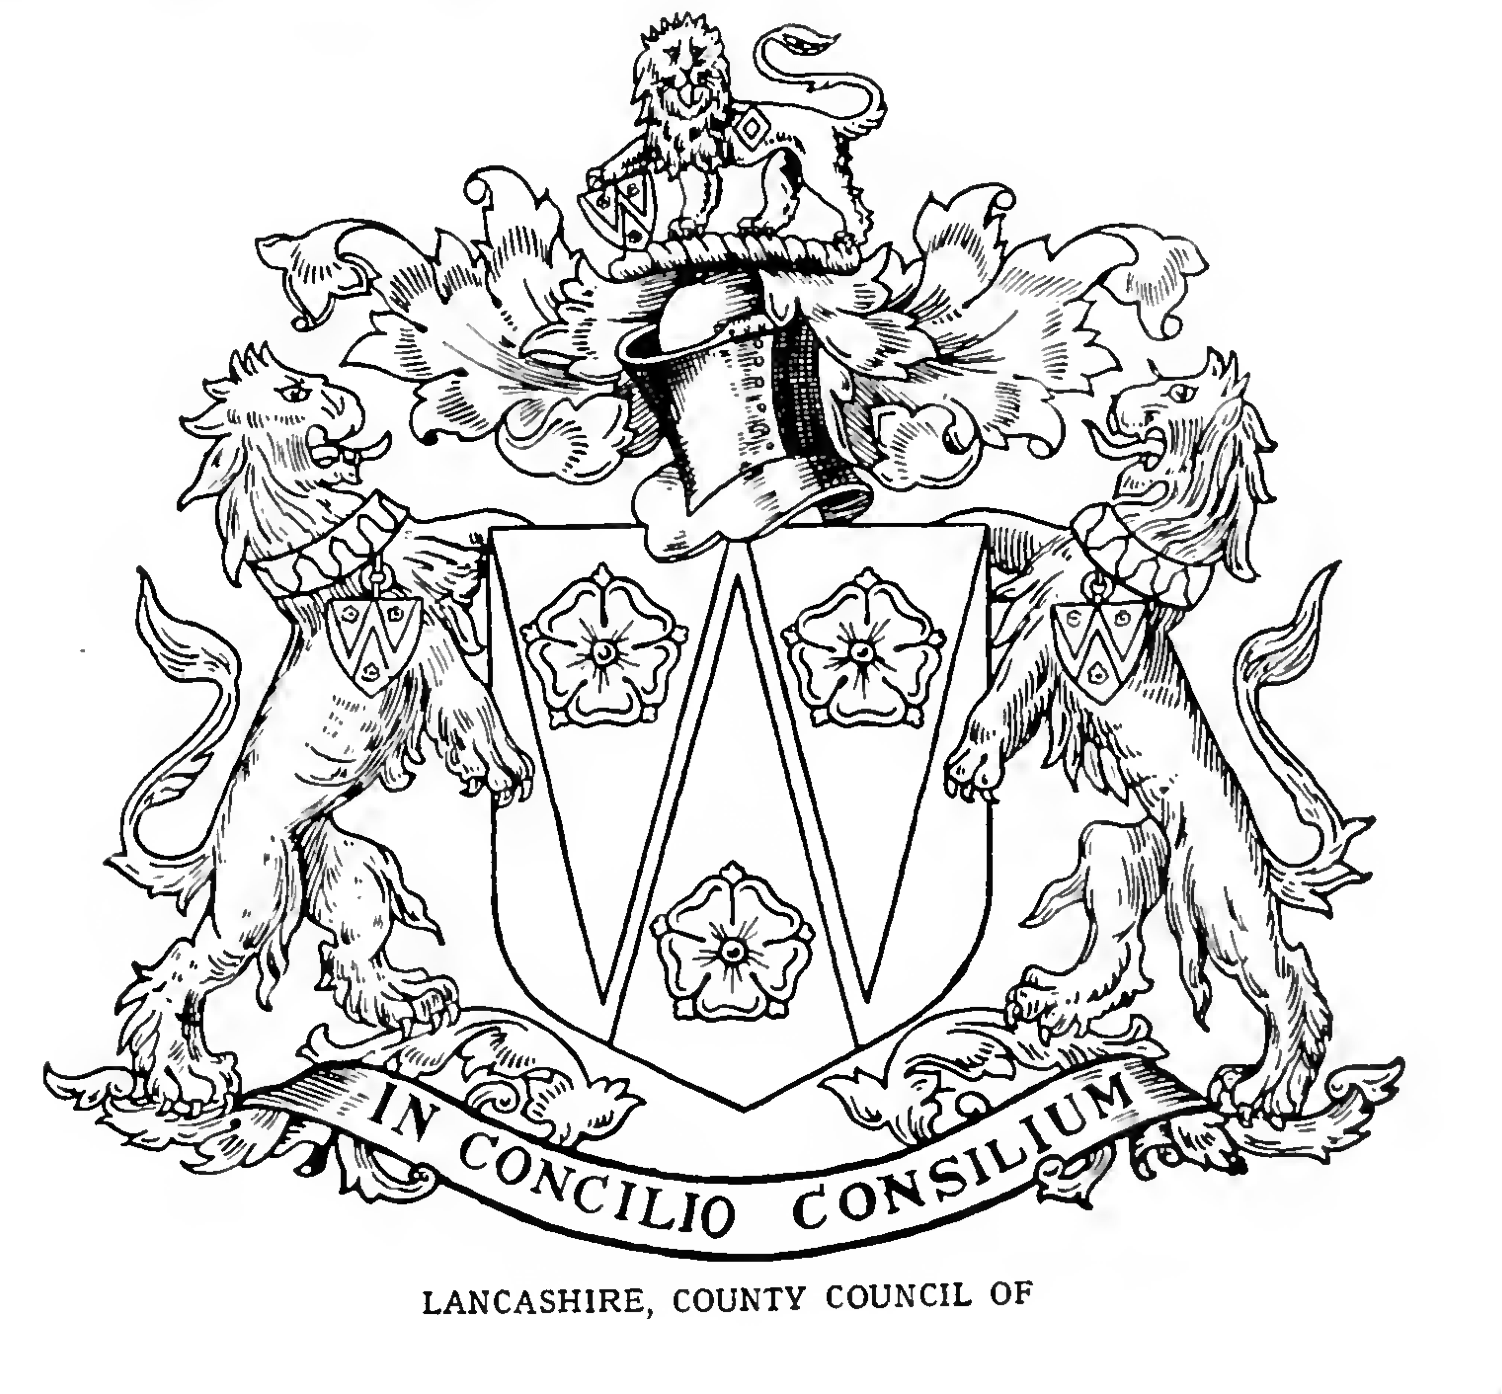 LANCASHIRE (The County Council of the County Palatine of Lancaster).